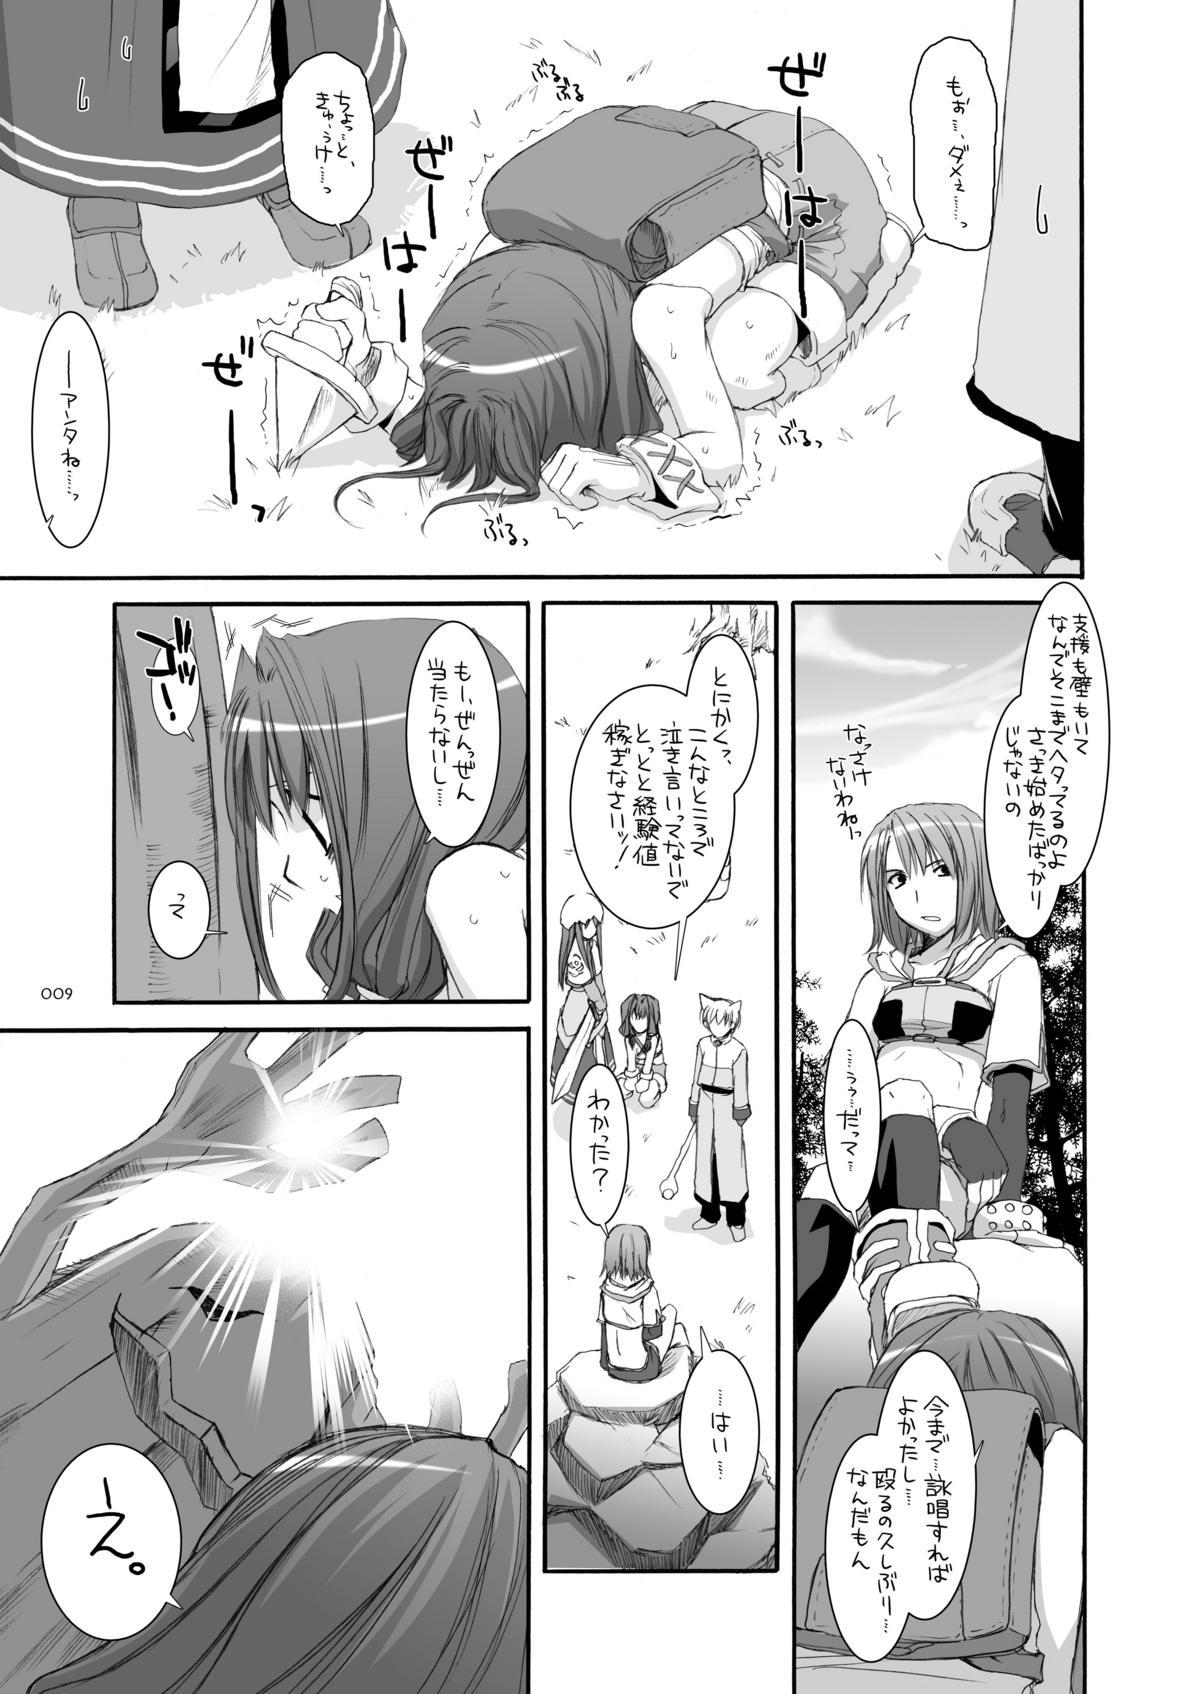 Girl Girl DL-RO Perfect Collection No.04 - Ragnarok online Gay Blackhair - Page 8